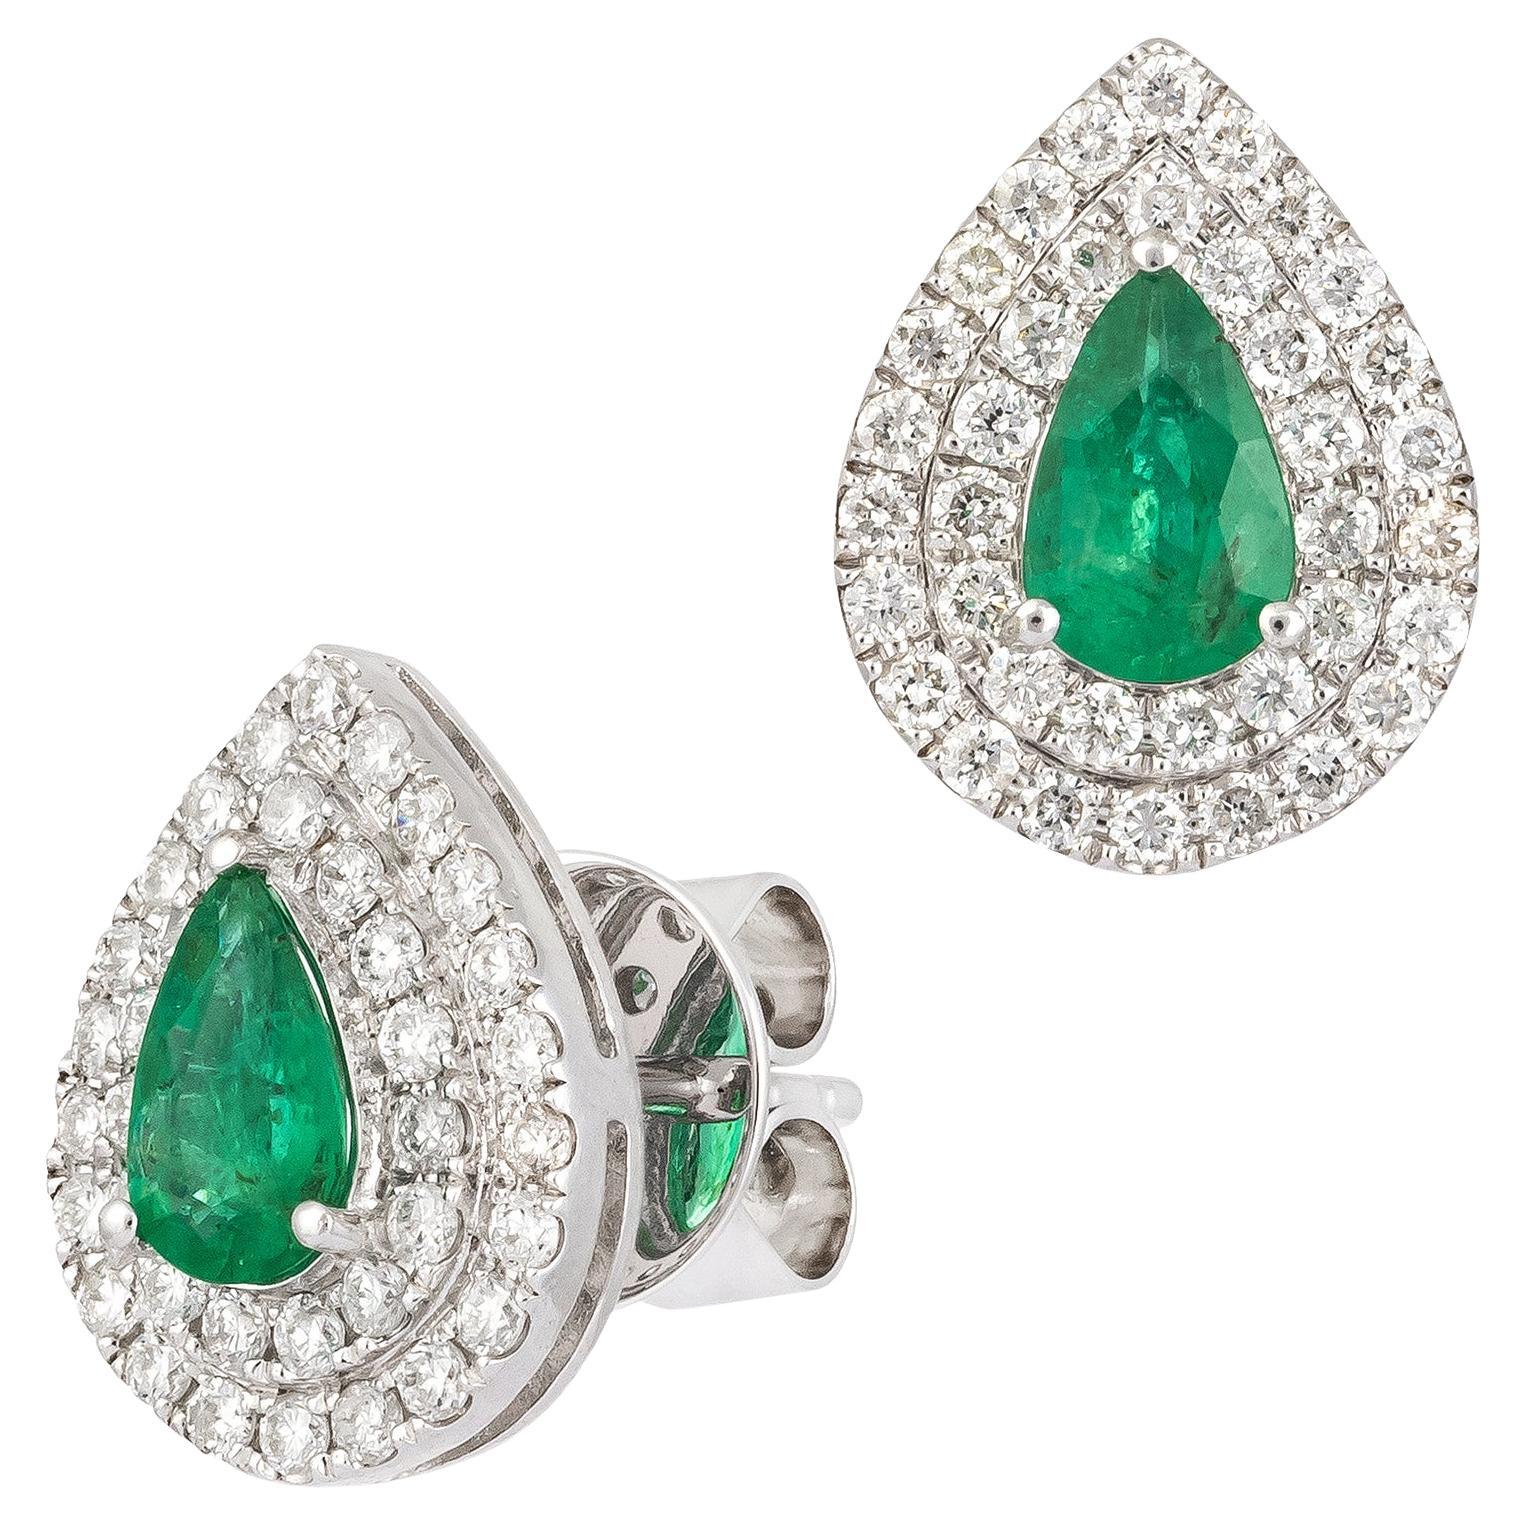 Every Day White Gold 18K Earrings Emerald Diamond for Her